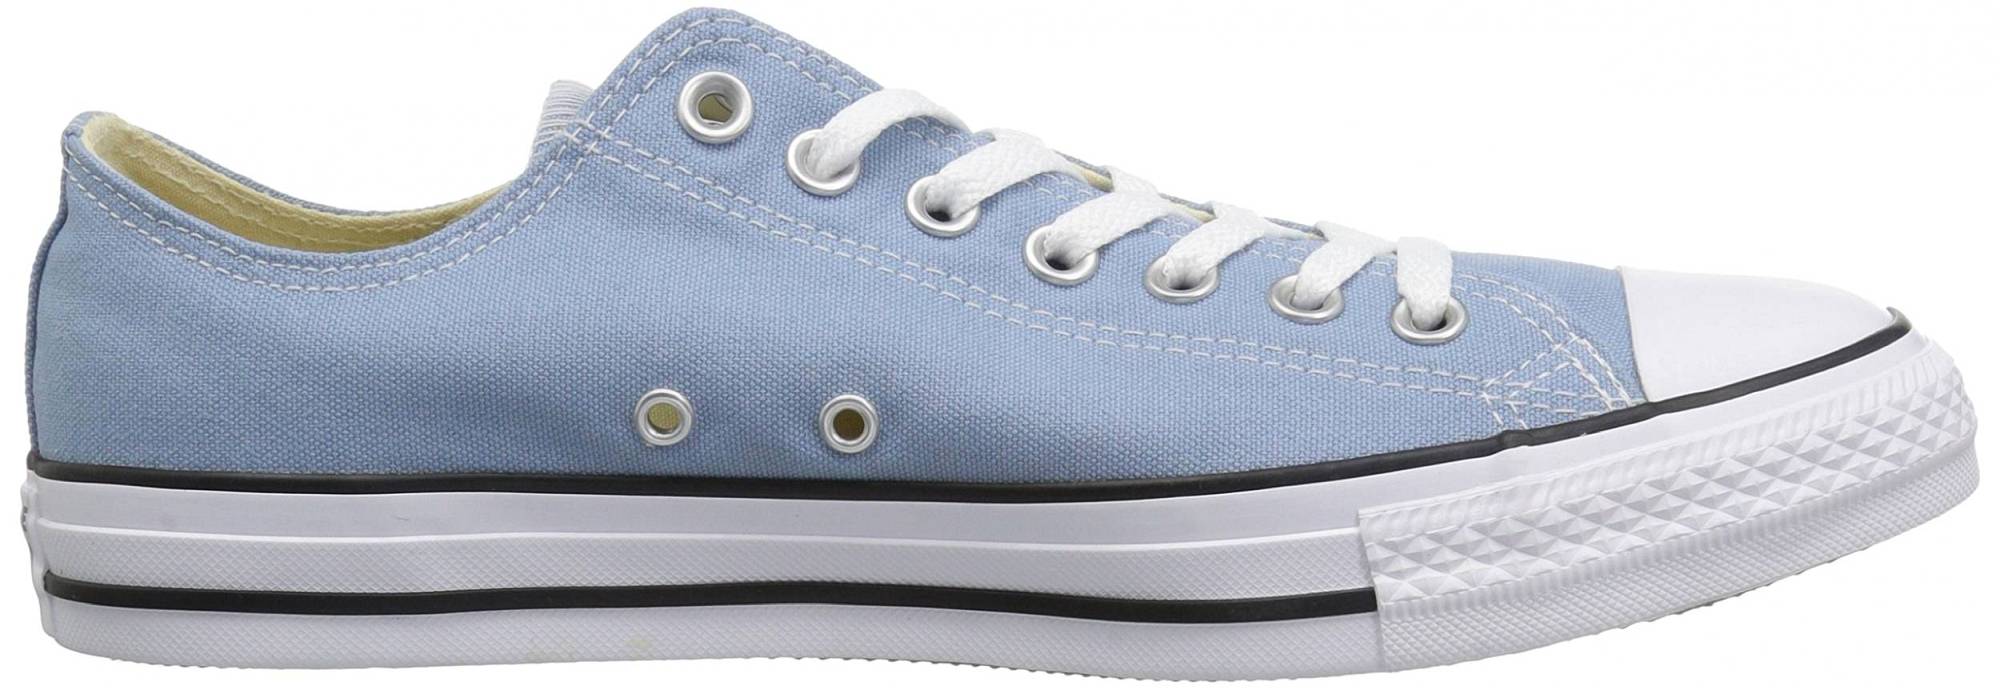 Converse Chuck Taylor All Star Seasonal Colors Low Top – Shoes Reviews ...